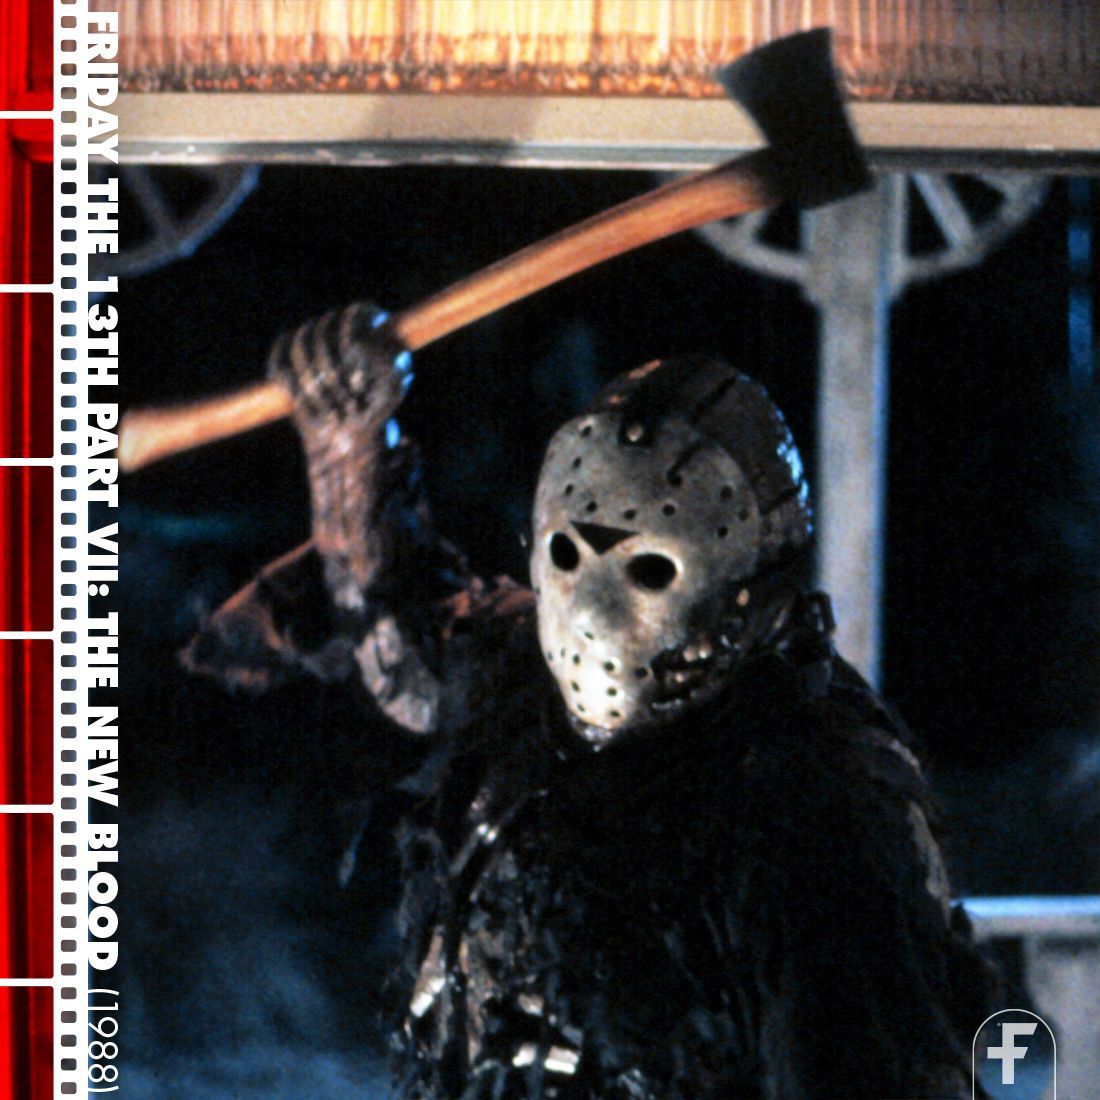 Jason is back, but this time someone's waiting!

On this day in 1988: FRIDAY THE 13TH PART VII: THE NEW BLOOD hit theaters.